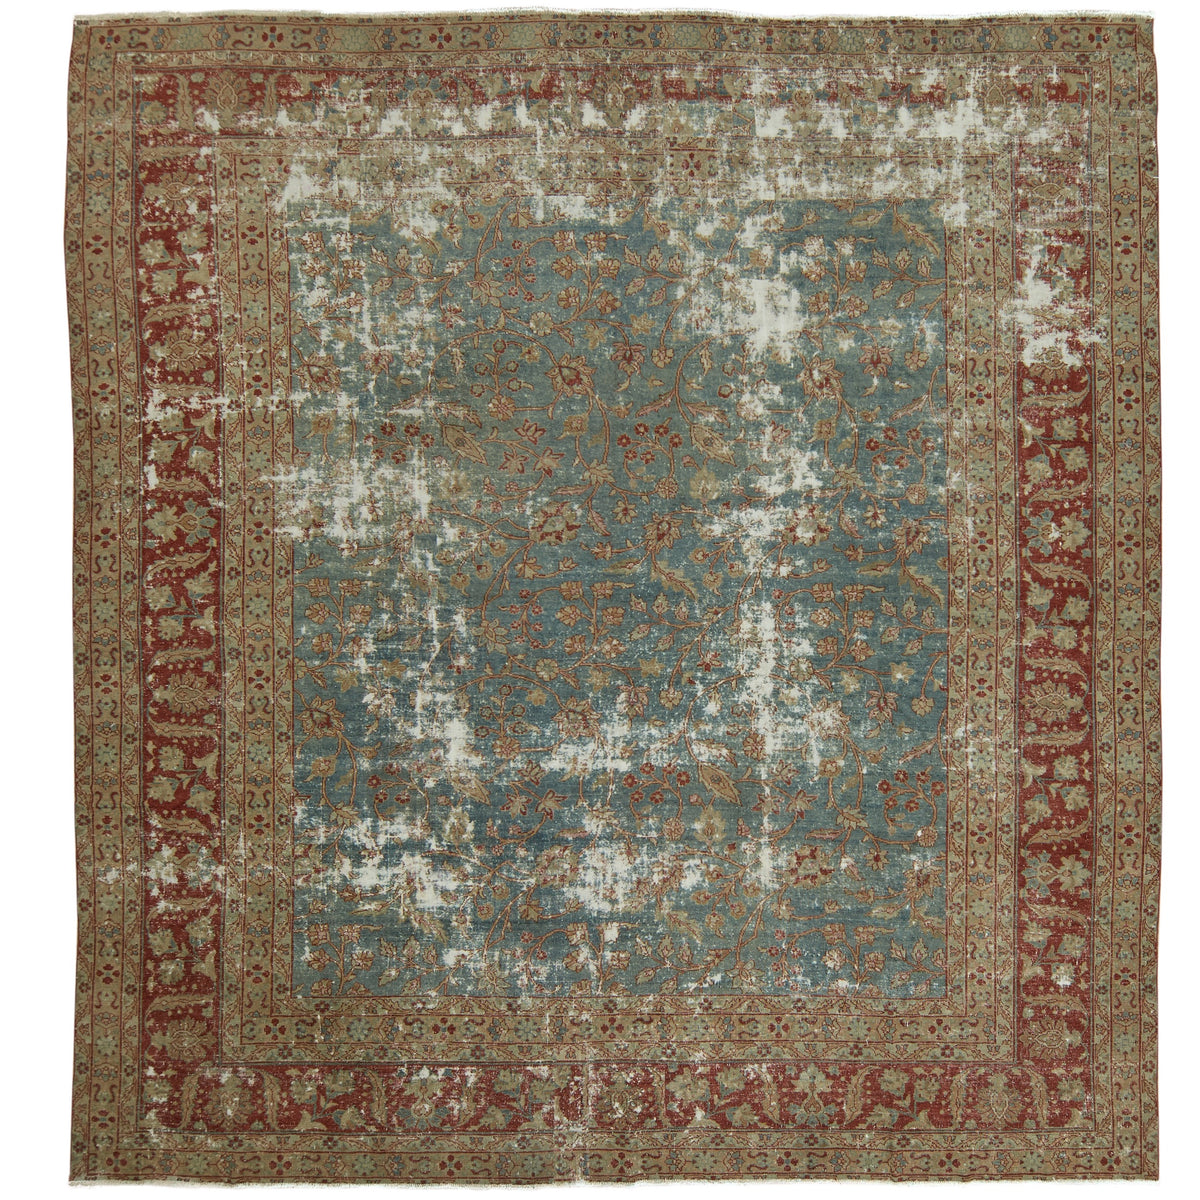 June - A Vision in Persian Blue | Kuden Rugs